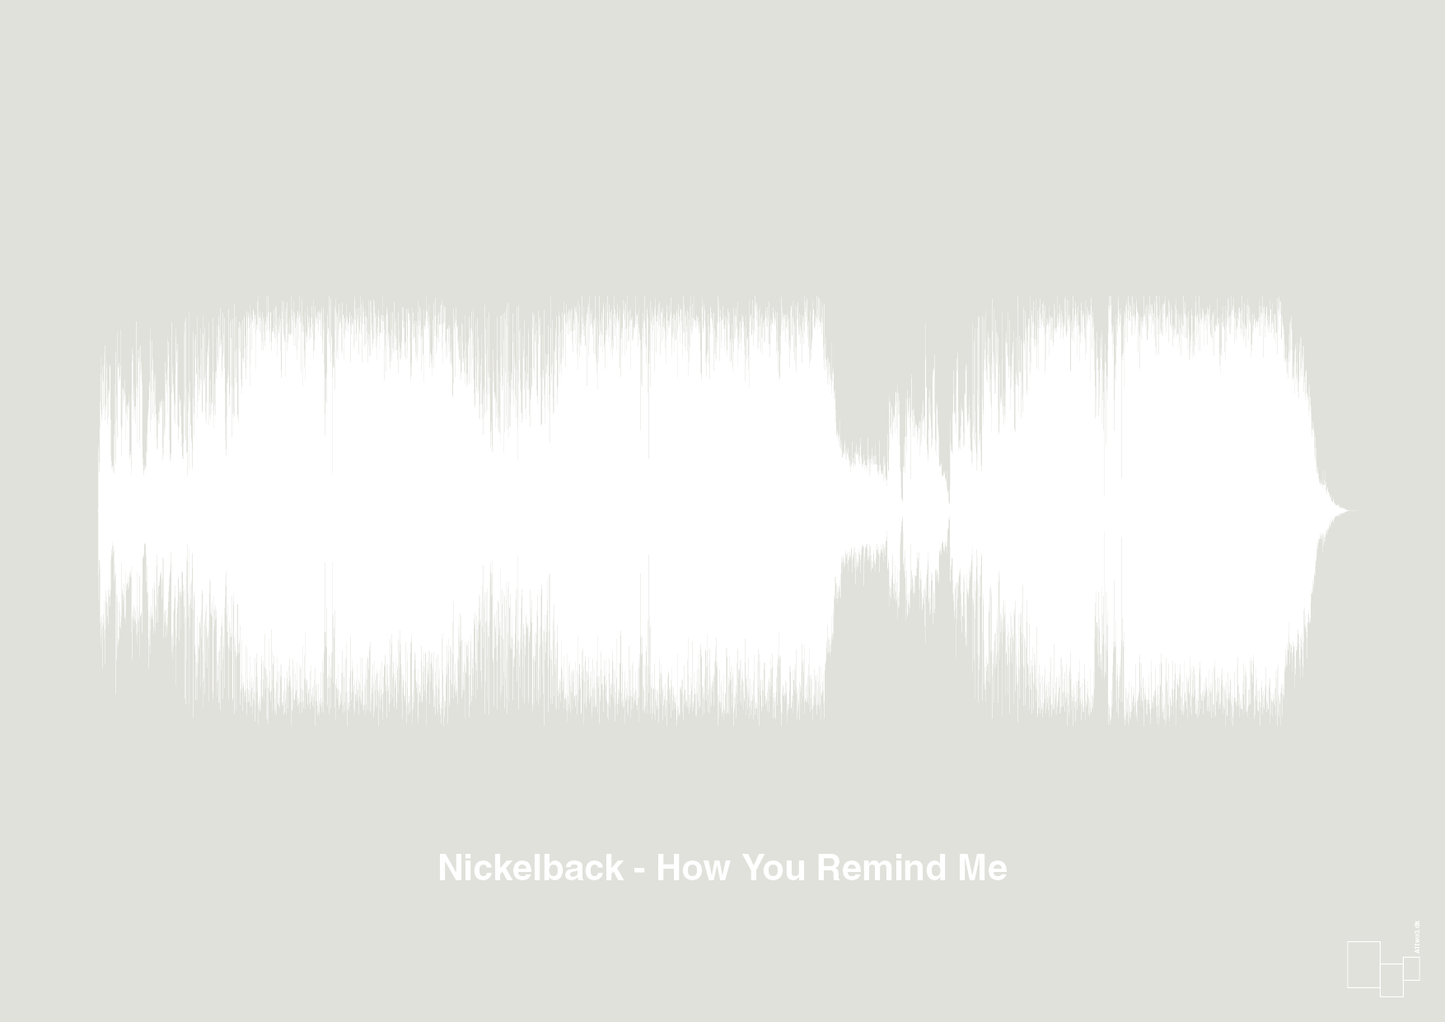 nickelback - how you remind me - Plakat med Musik i Painters White